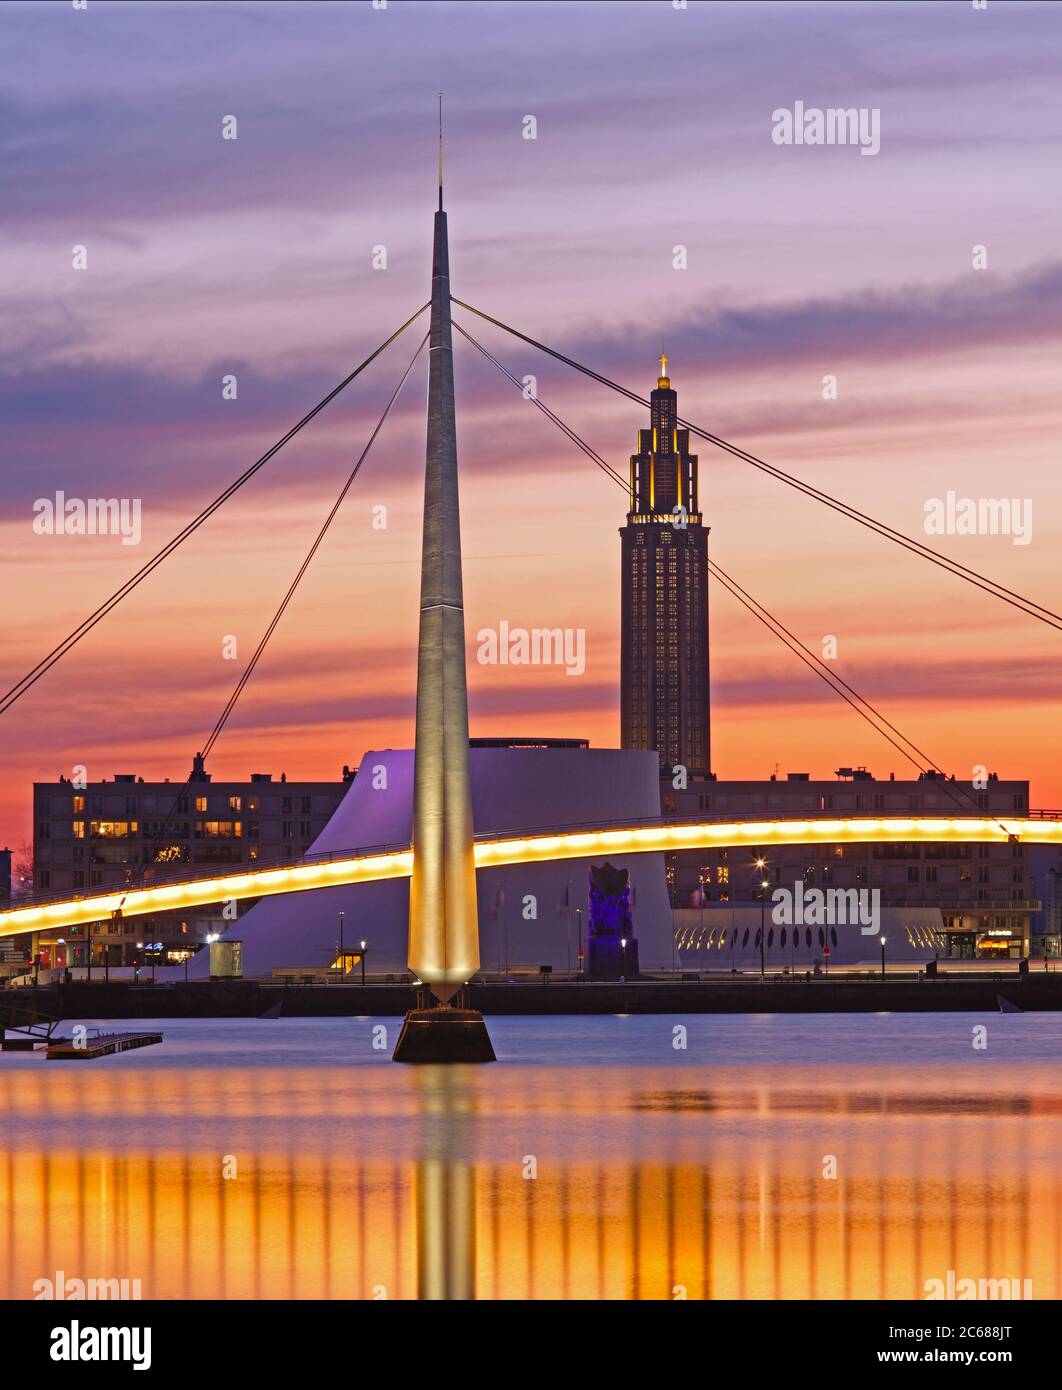 Illuminated bridge over Bassin du Commerce and Volcan at dusk, Le Havre, France Stock Photo